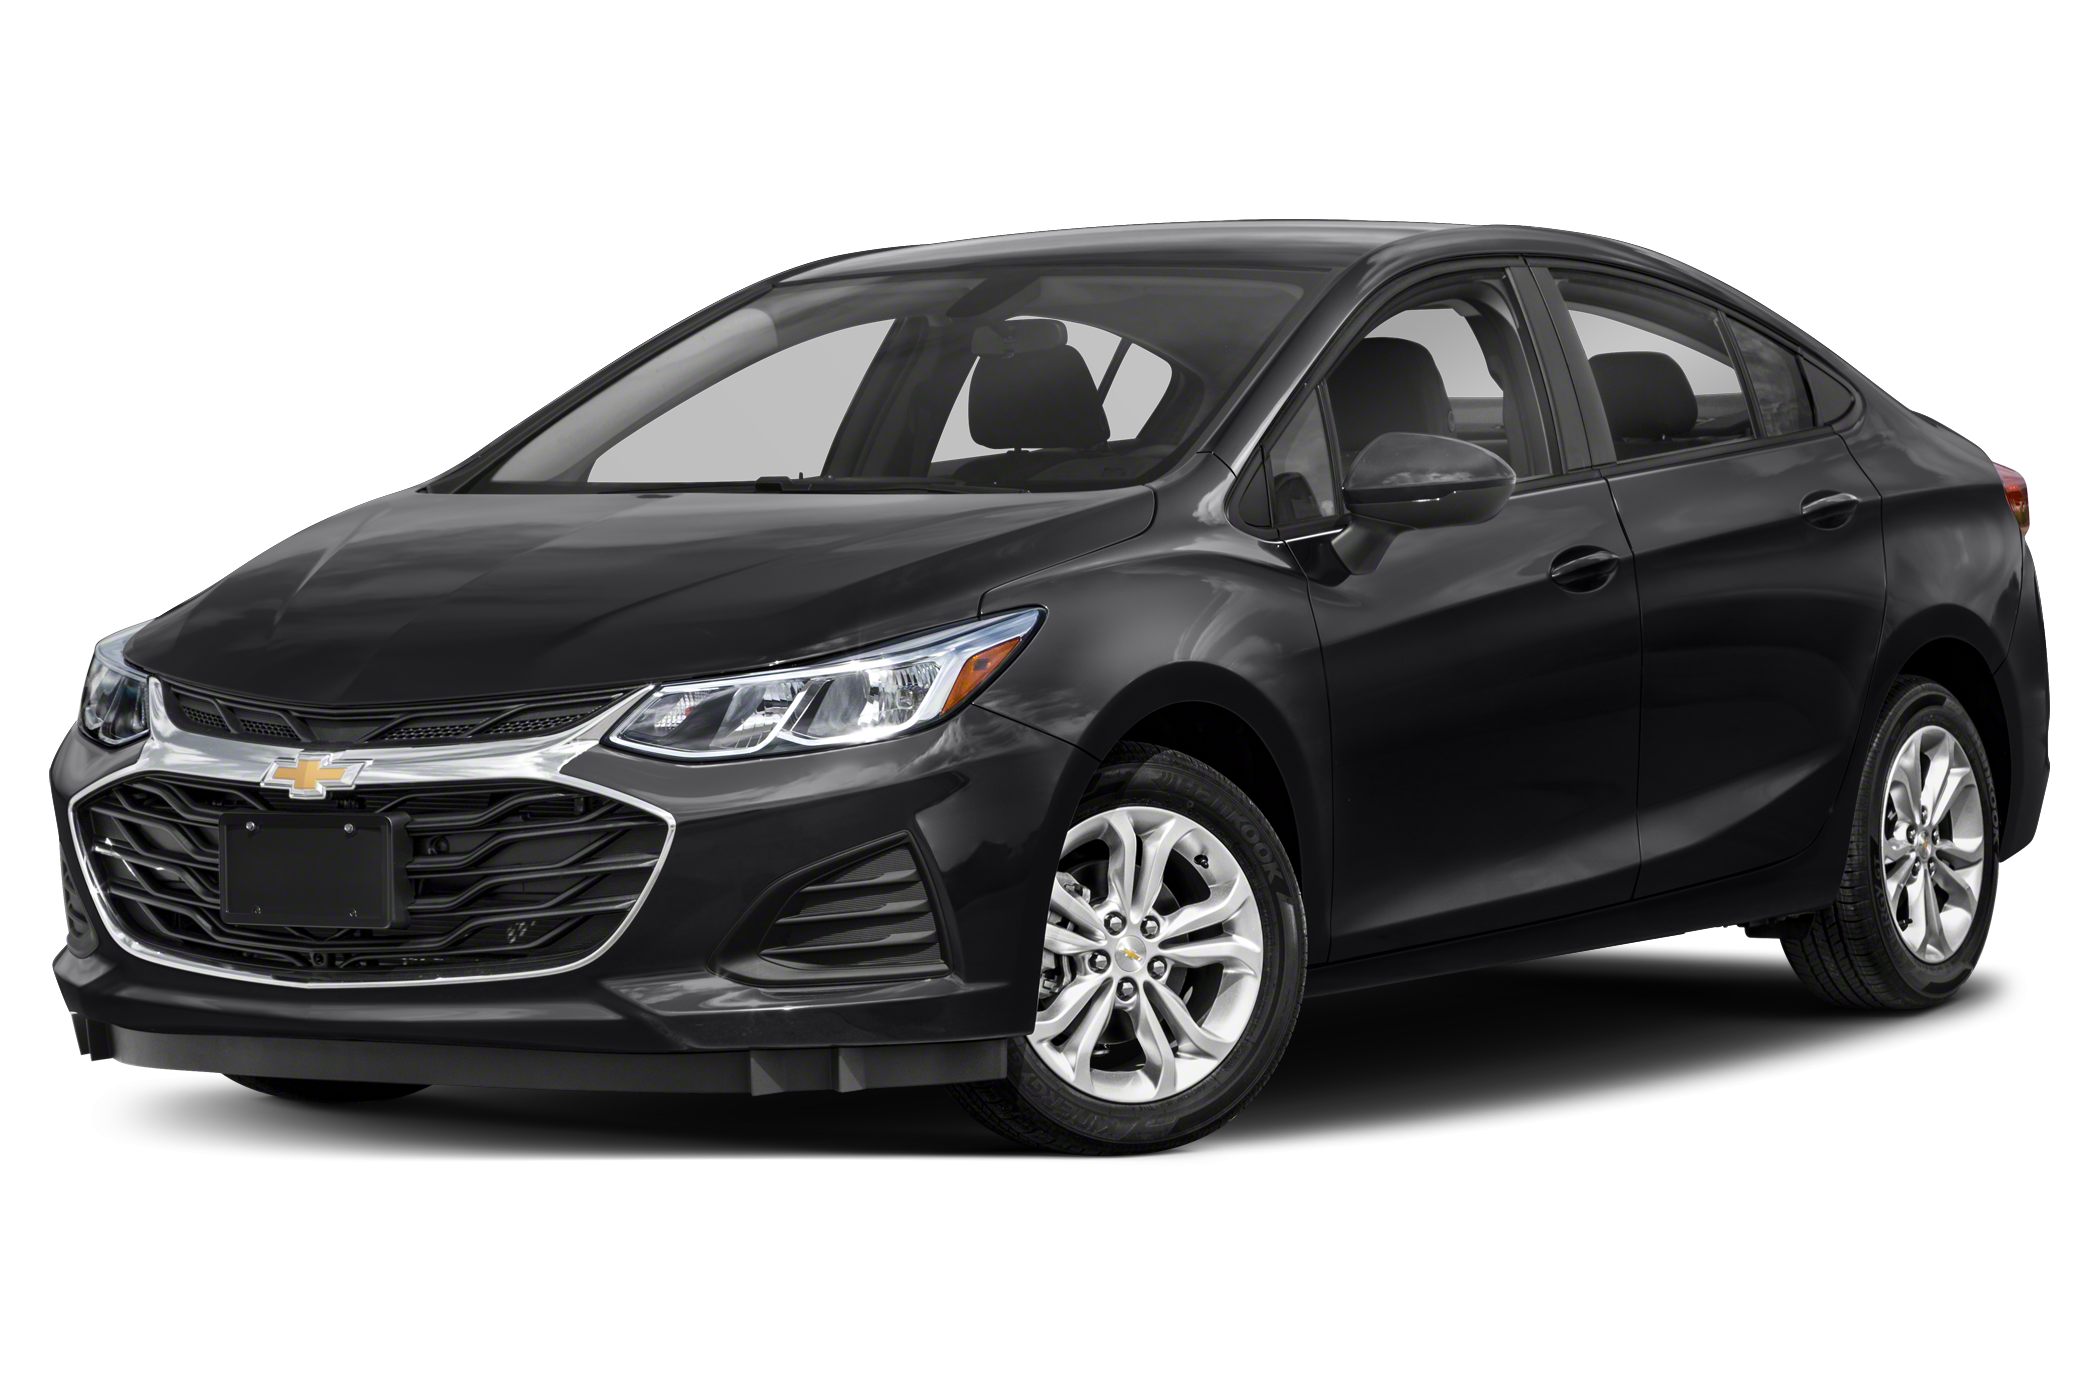 2019 Chevrolet Cruze Premier 4dr Sedan Pricing And Options